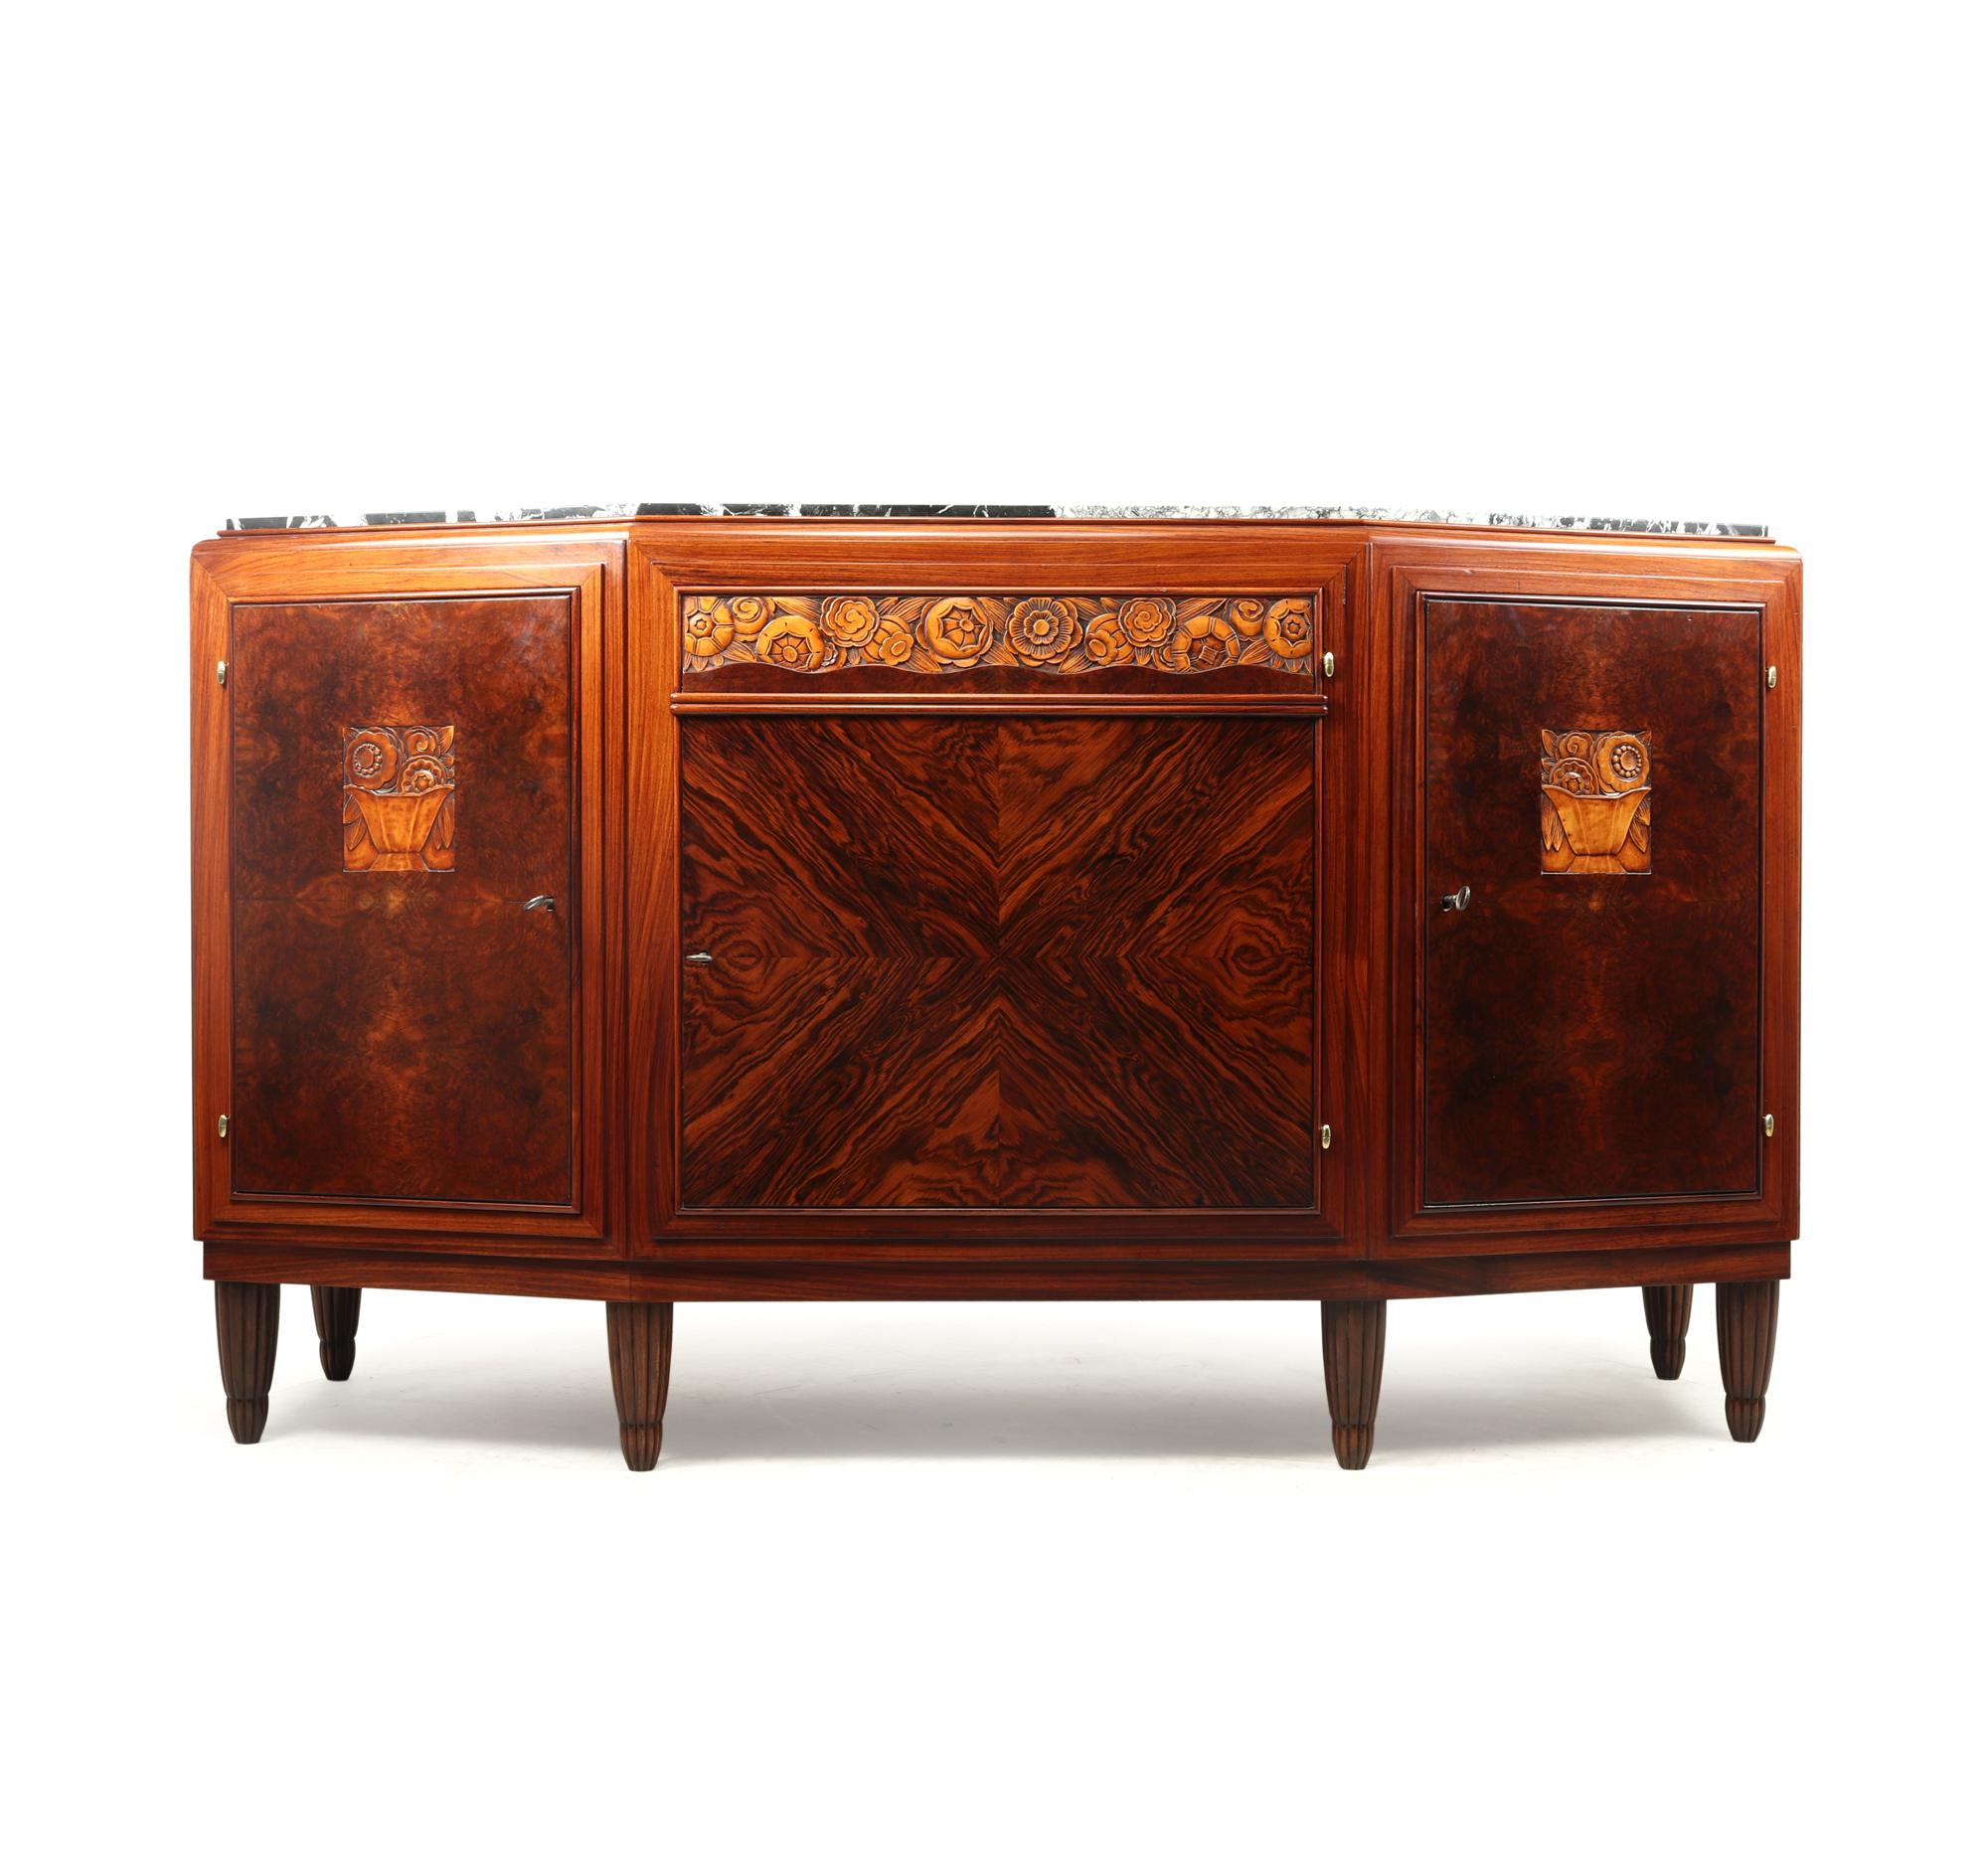 A French Art Deco sideboard produced in Paris in the 1920’s black and white marble top on a solid oak framed cabinet with amboyna and rosewood with carved motifs of flowers and fruits, lined in light blonde sycamore with excellent quality locks.